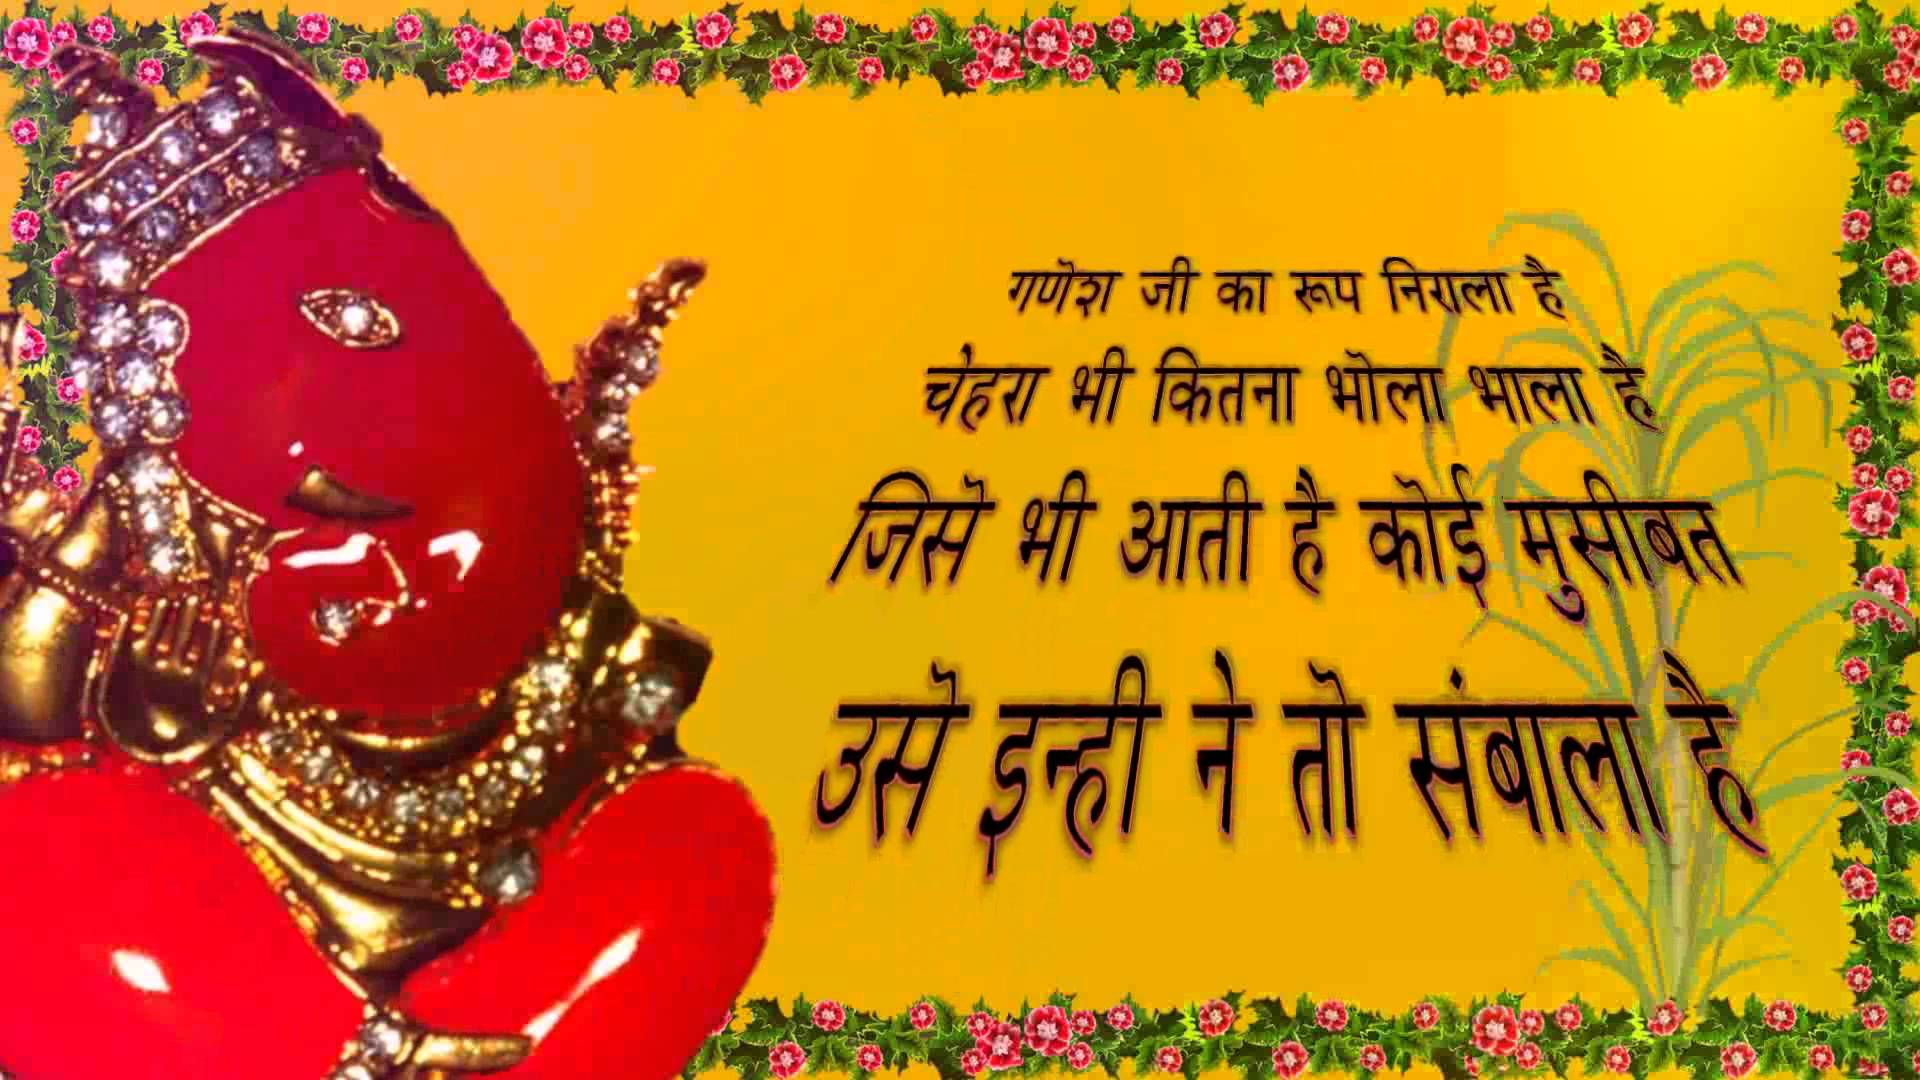 Happy Ganesh Chaturthi Wishes Greeting Card Images & Picture in Hindi For Facebook & Google+